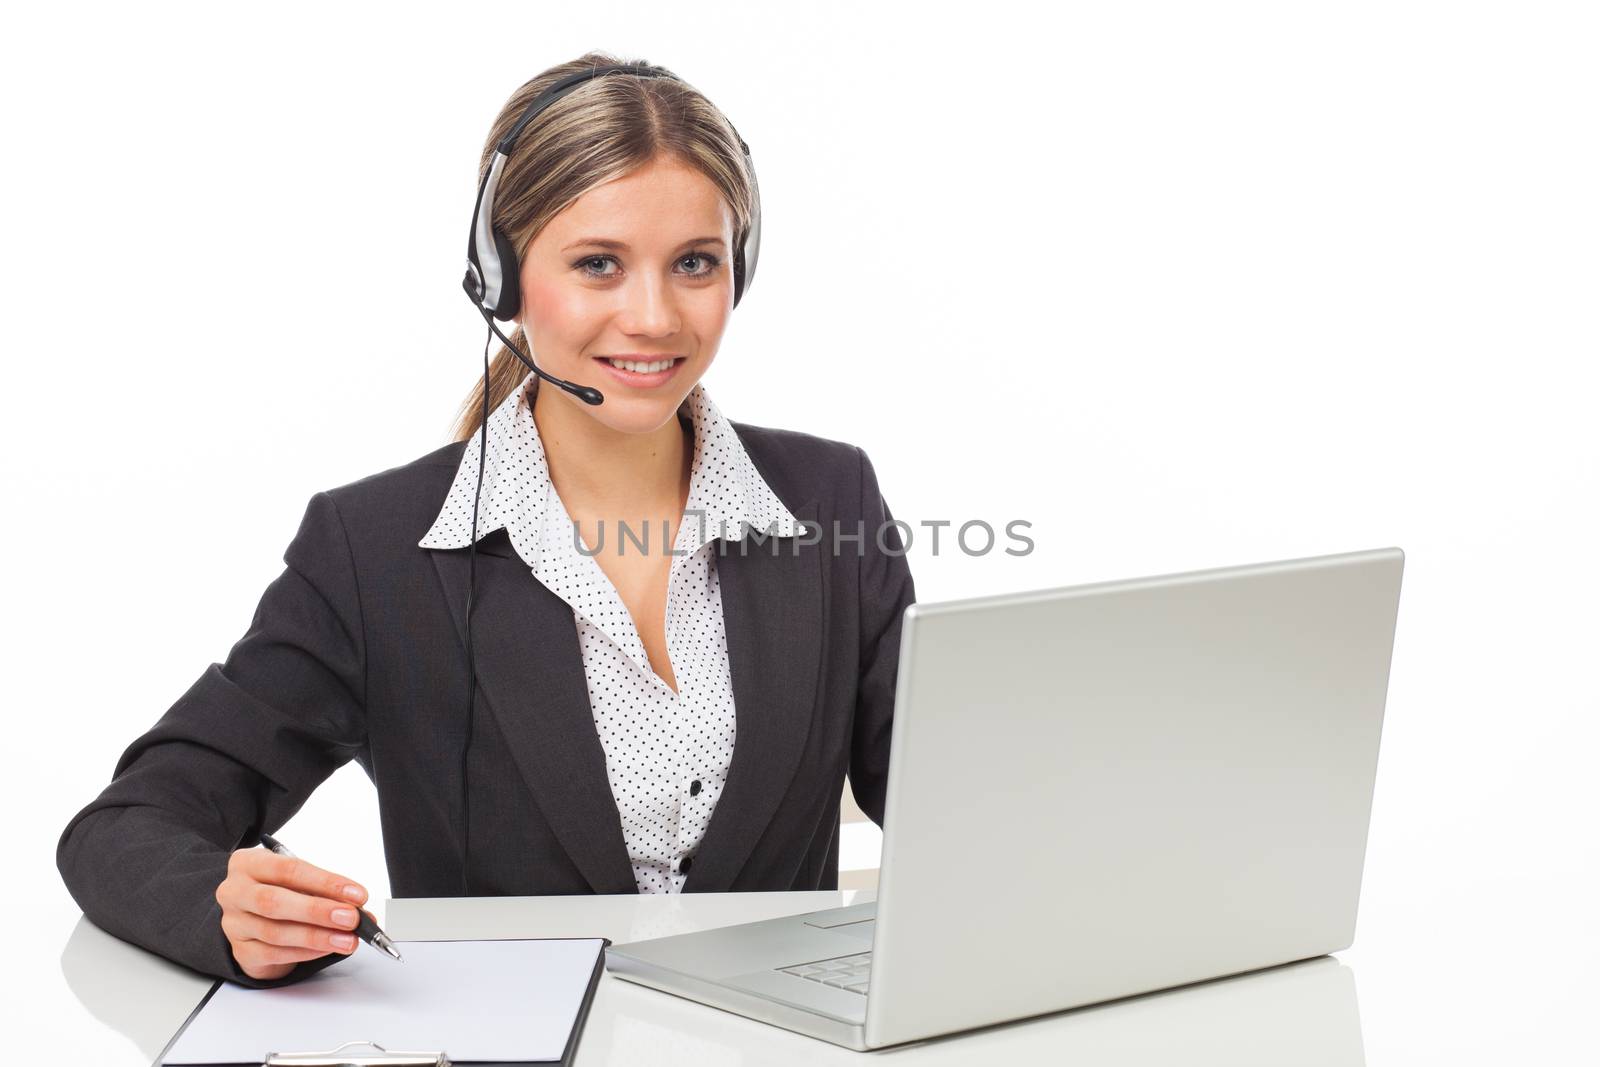 Beautiful young woman with headphones and laptop illustrating business service, on white